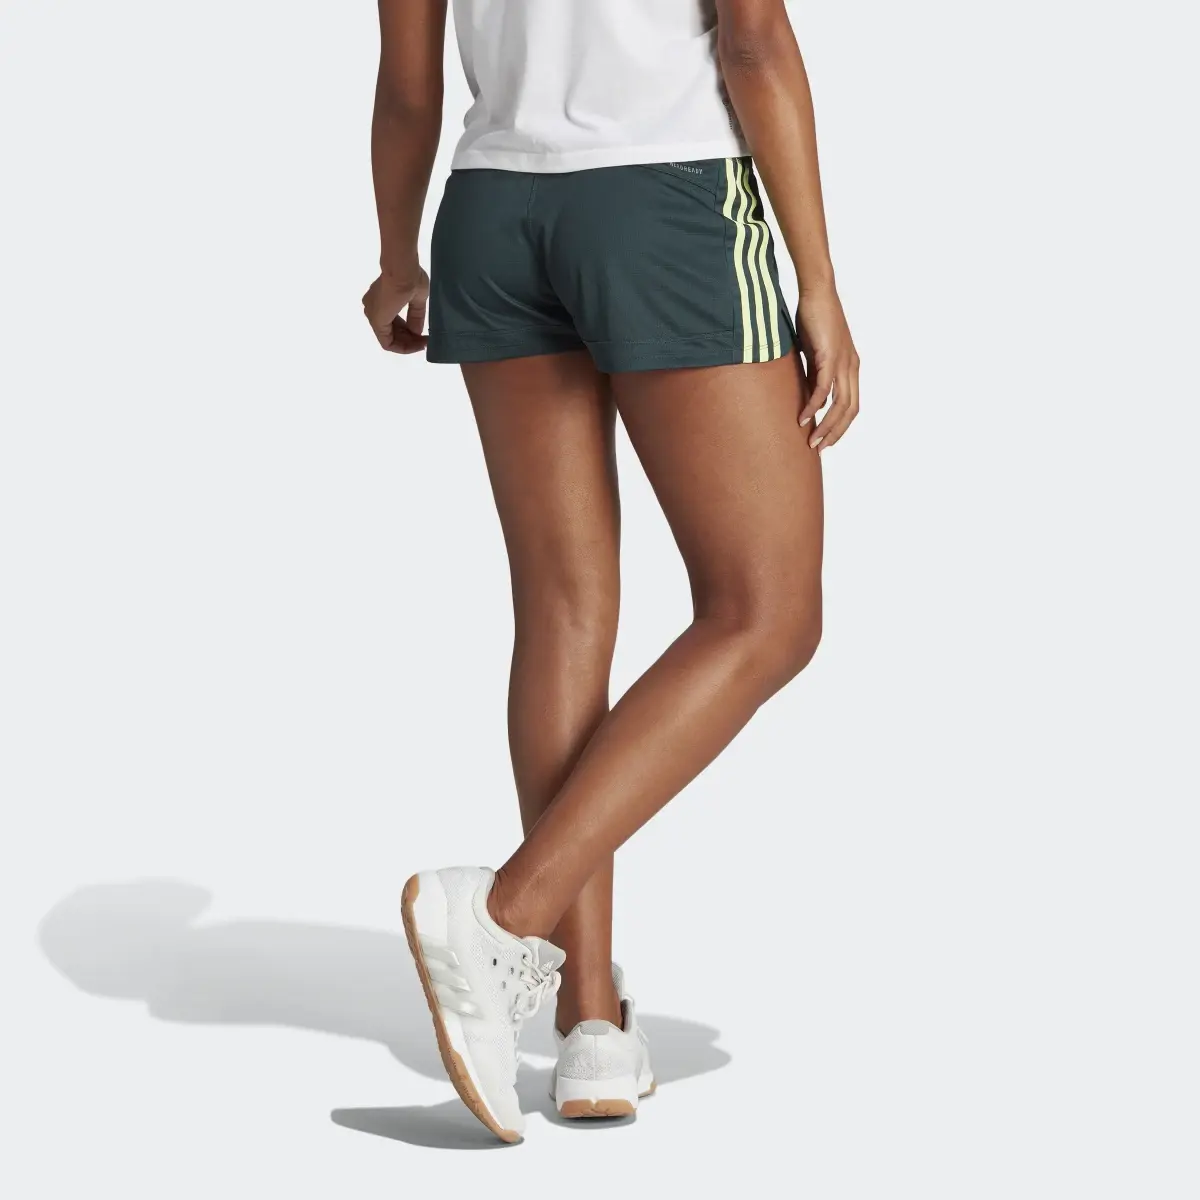 Adidas Pacer 3-Stripes Knit Shorts. 2